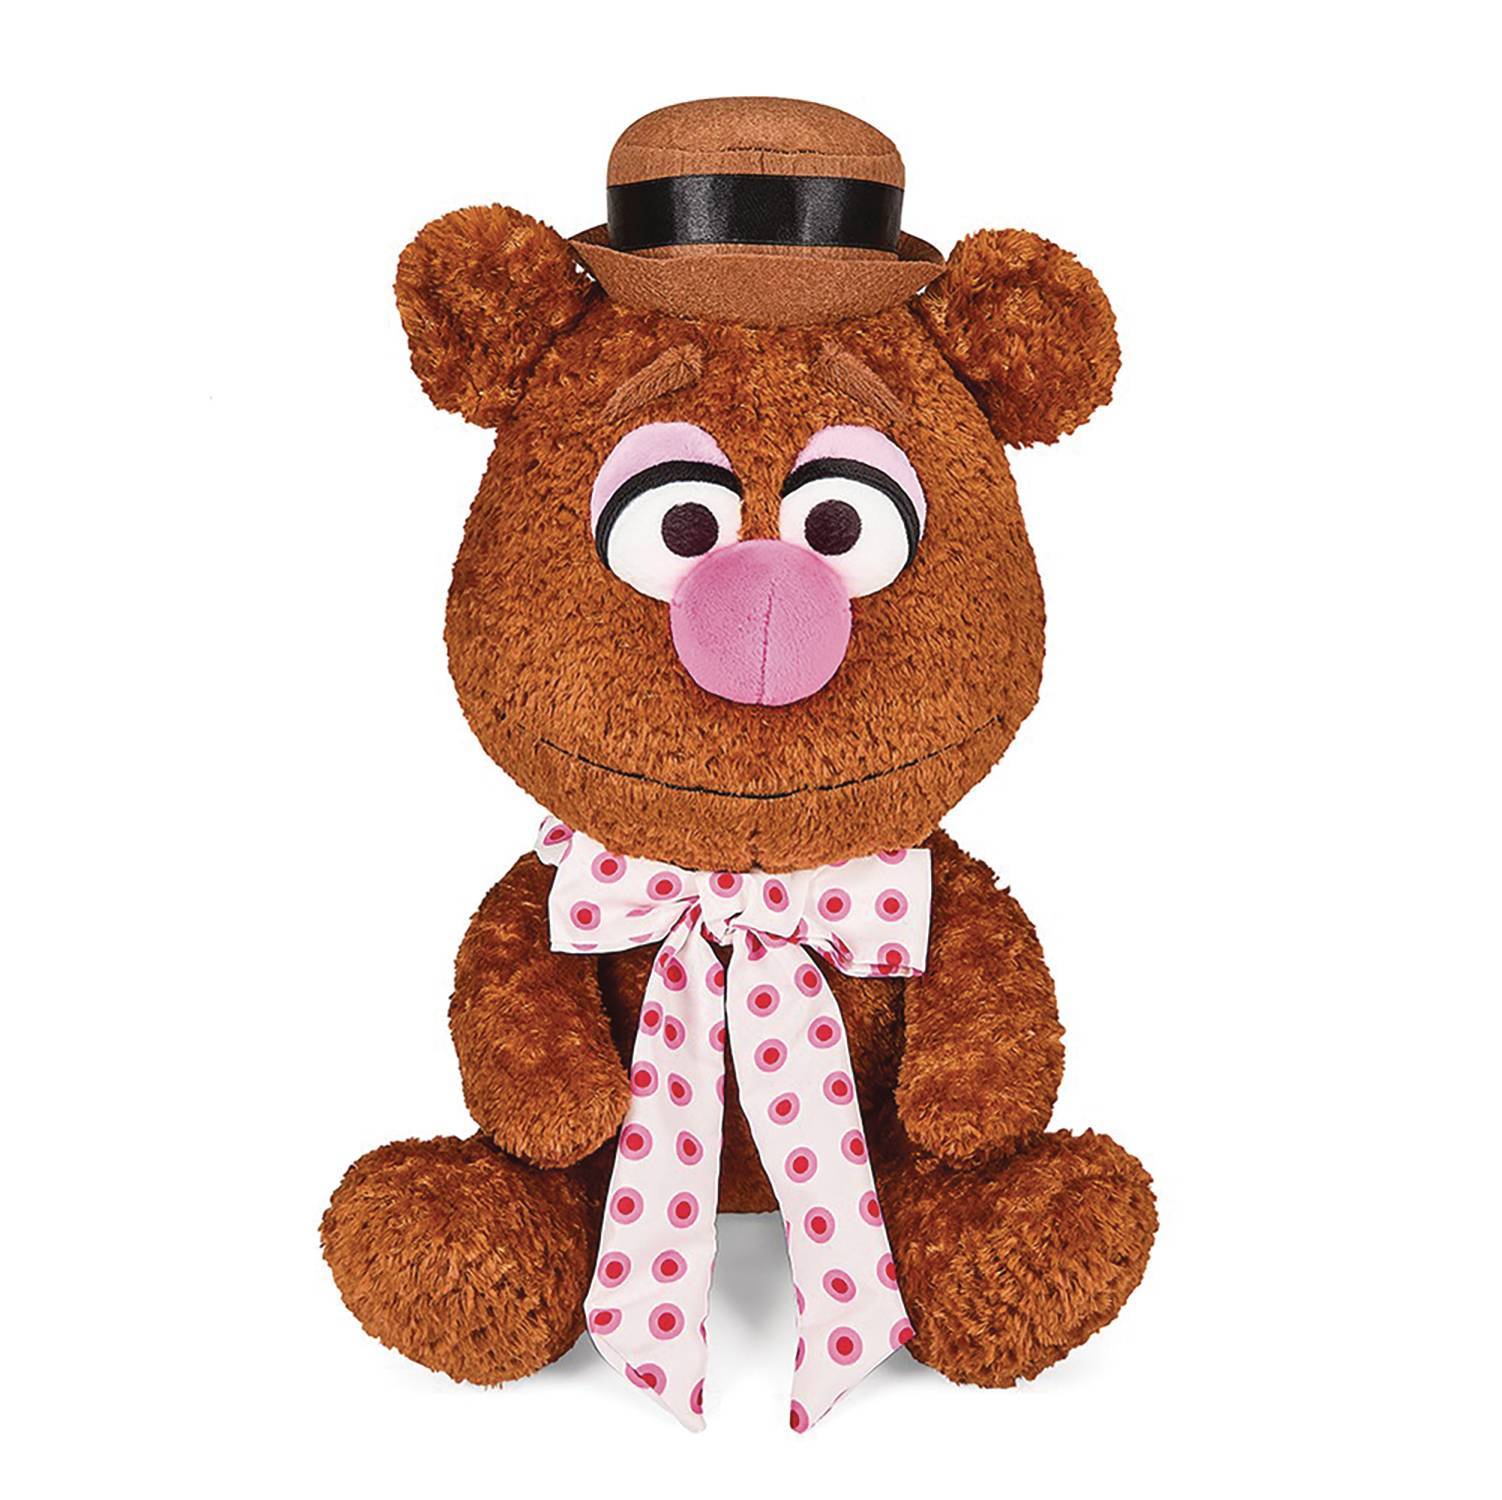 THE MUPPETS FOZZIE BEAR 16IN PLUSH